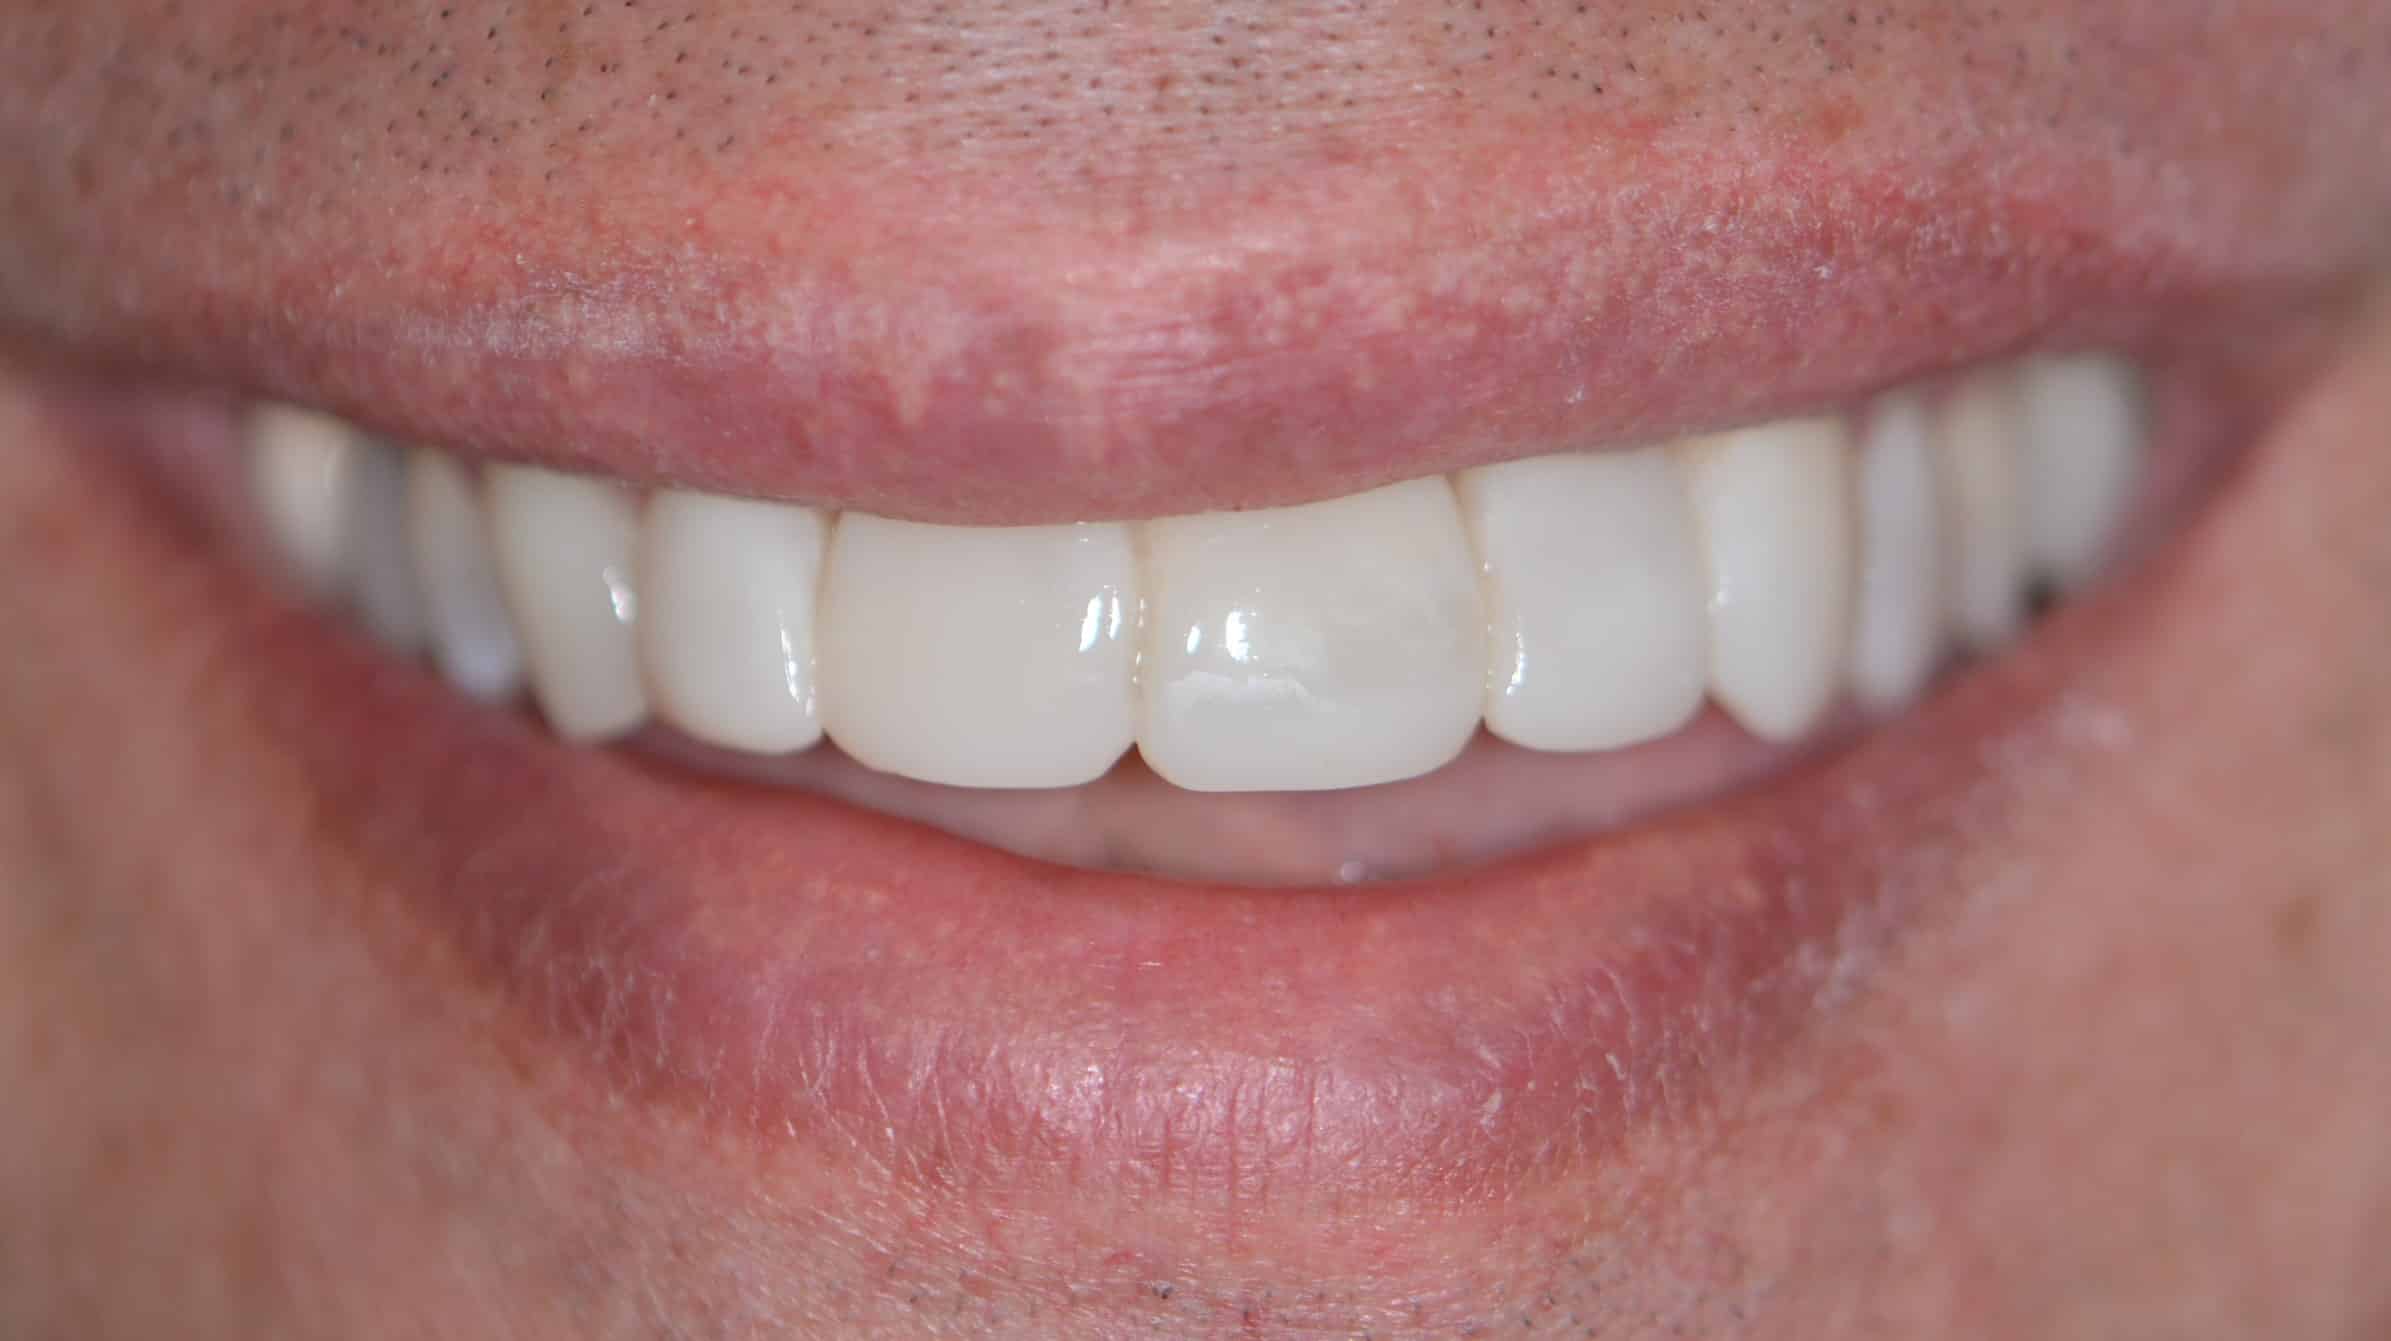 Is it possible to make my teeth all the same color and length?